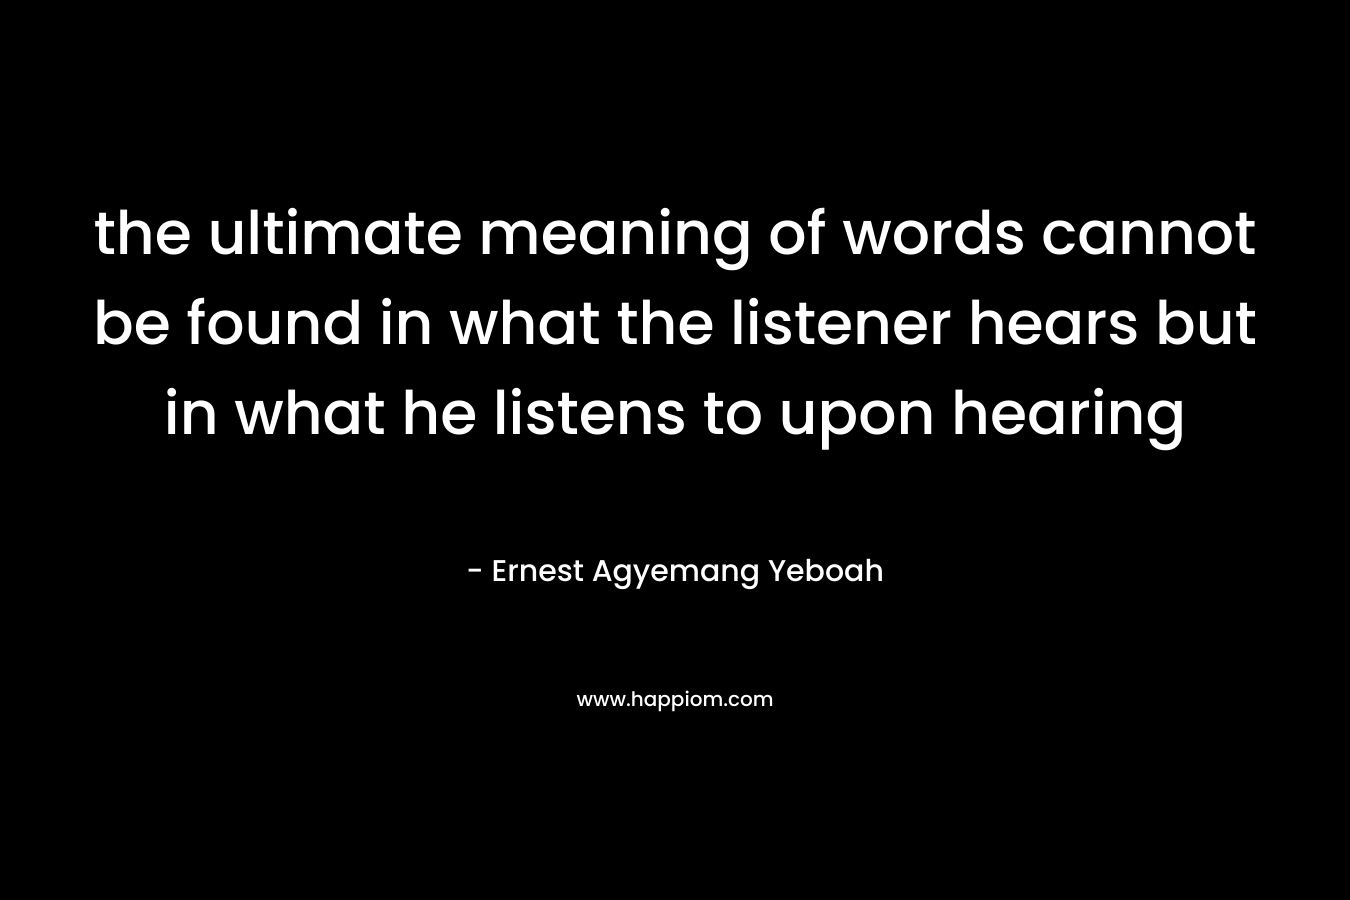 the ultimate meaning of words cannot be found in what the listener hears but in what he listens to upon hearing